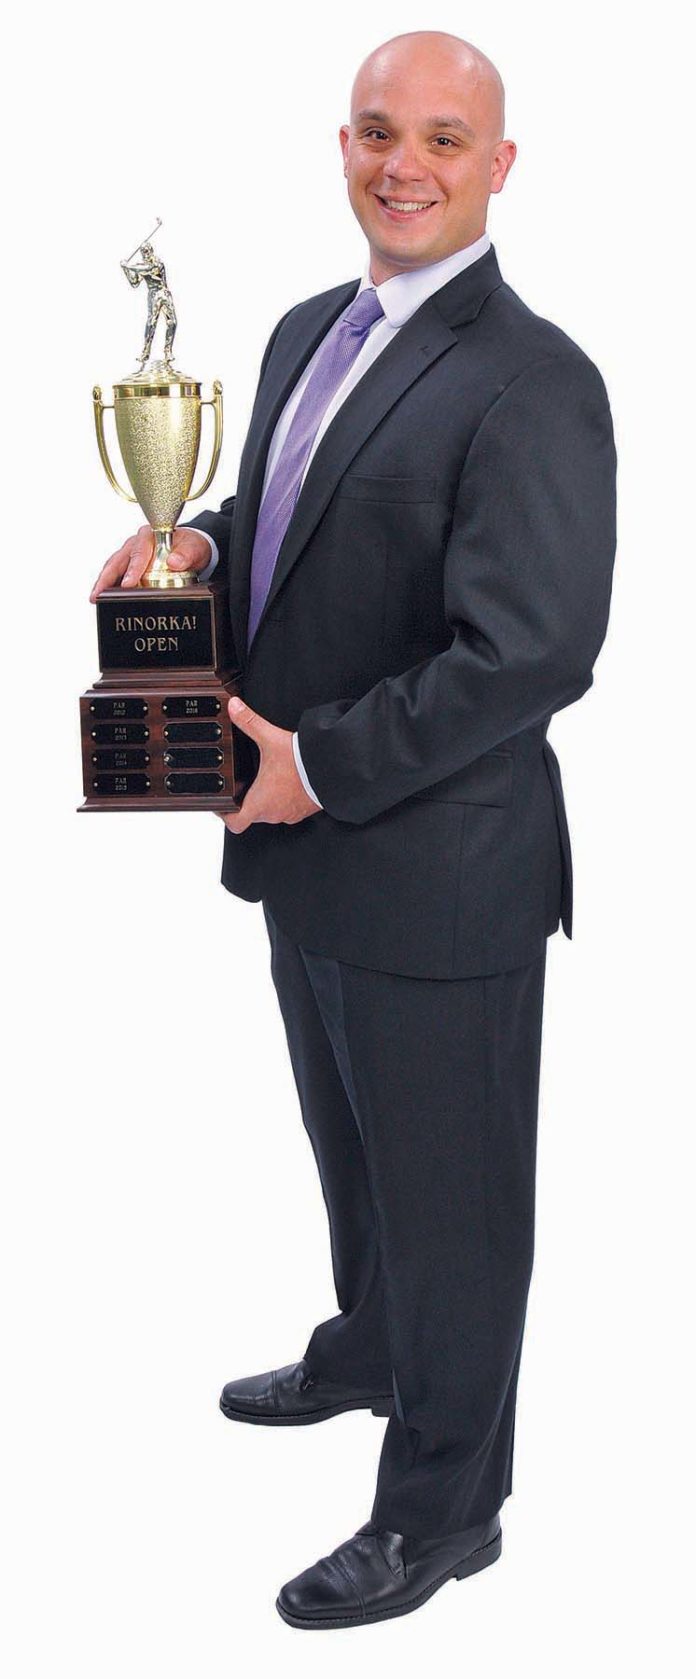 THE PROP: Peter A. Rinaudo shows off his family’s gold trophy, a relic of their annual Rinorka! Open.